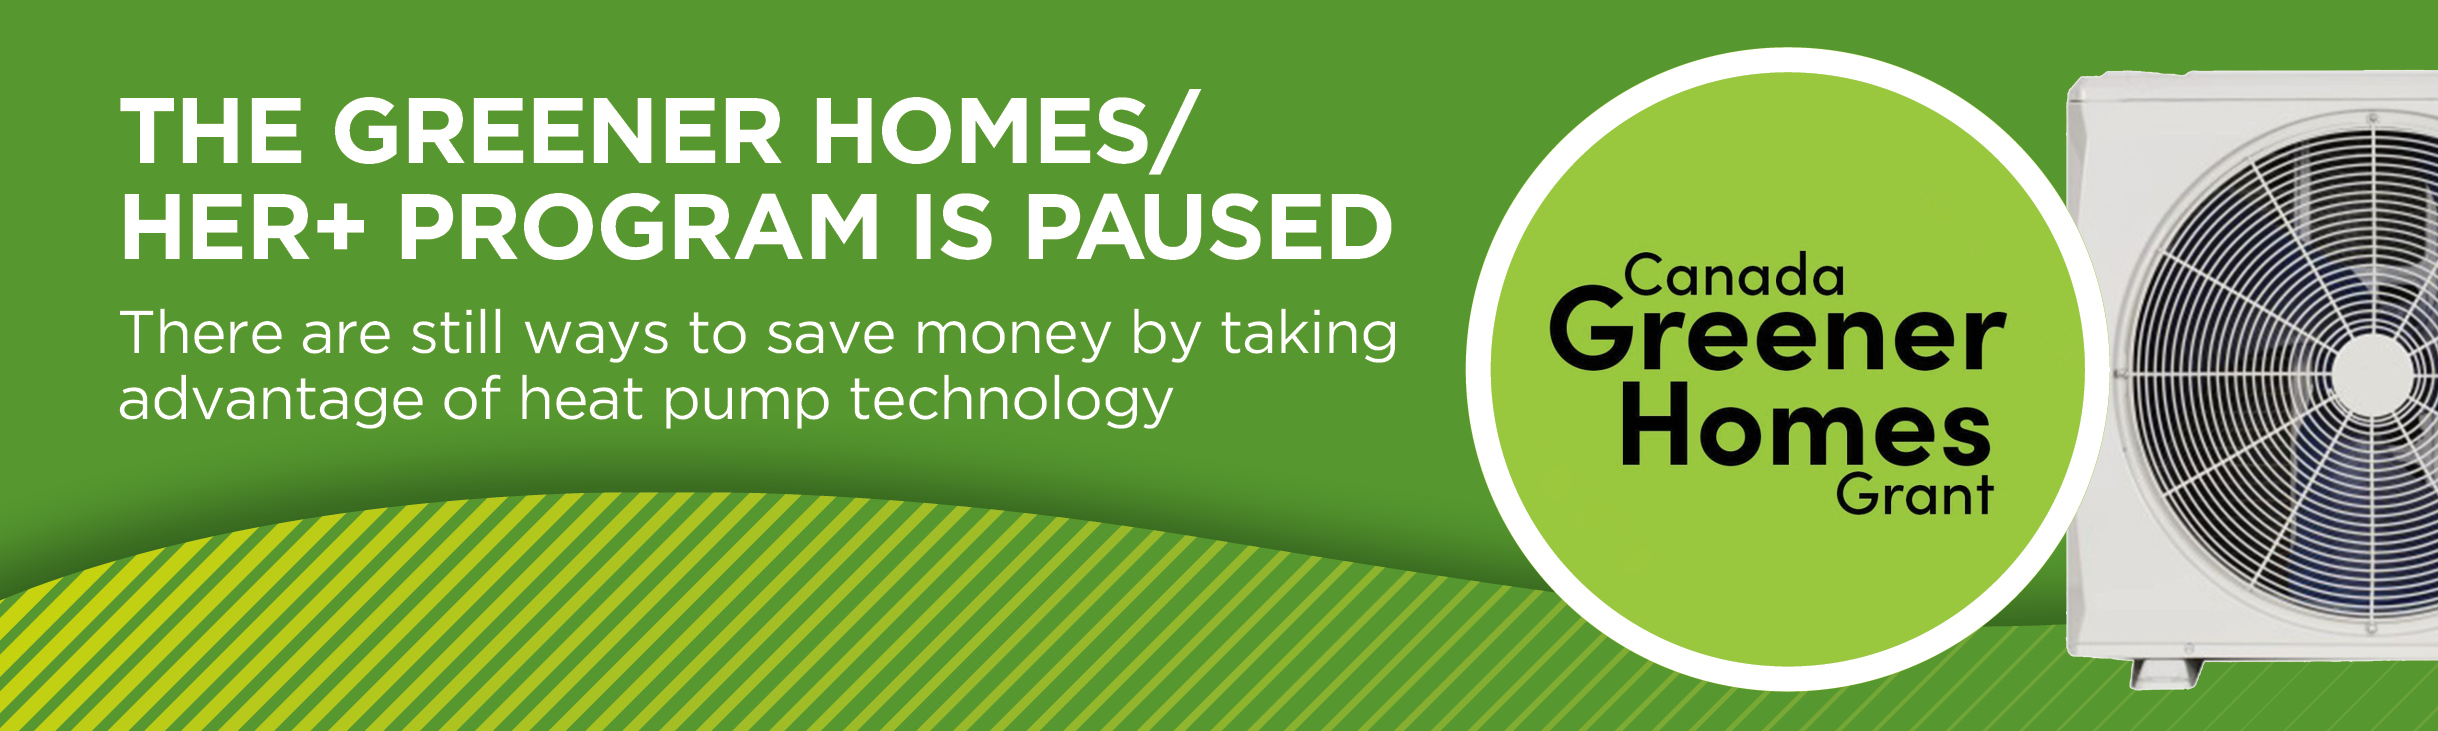 Greener Homes Pause Campaign